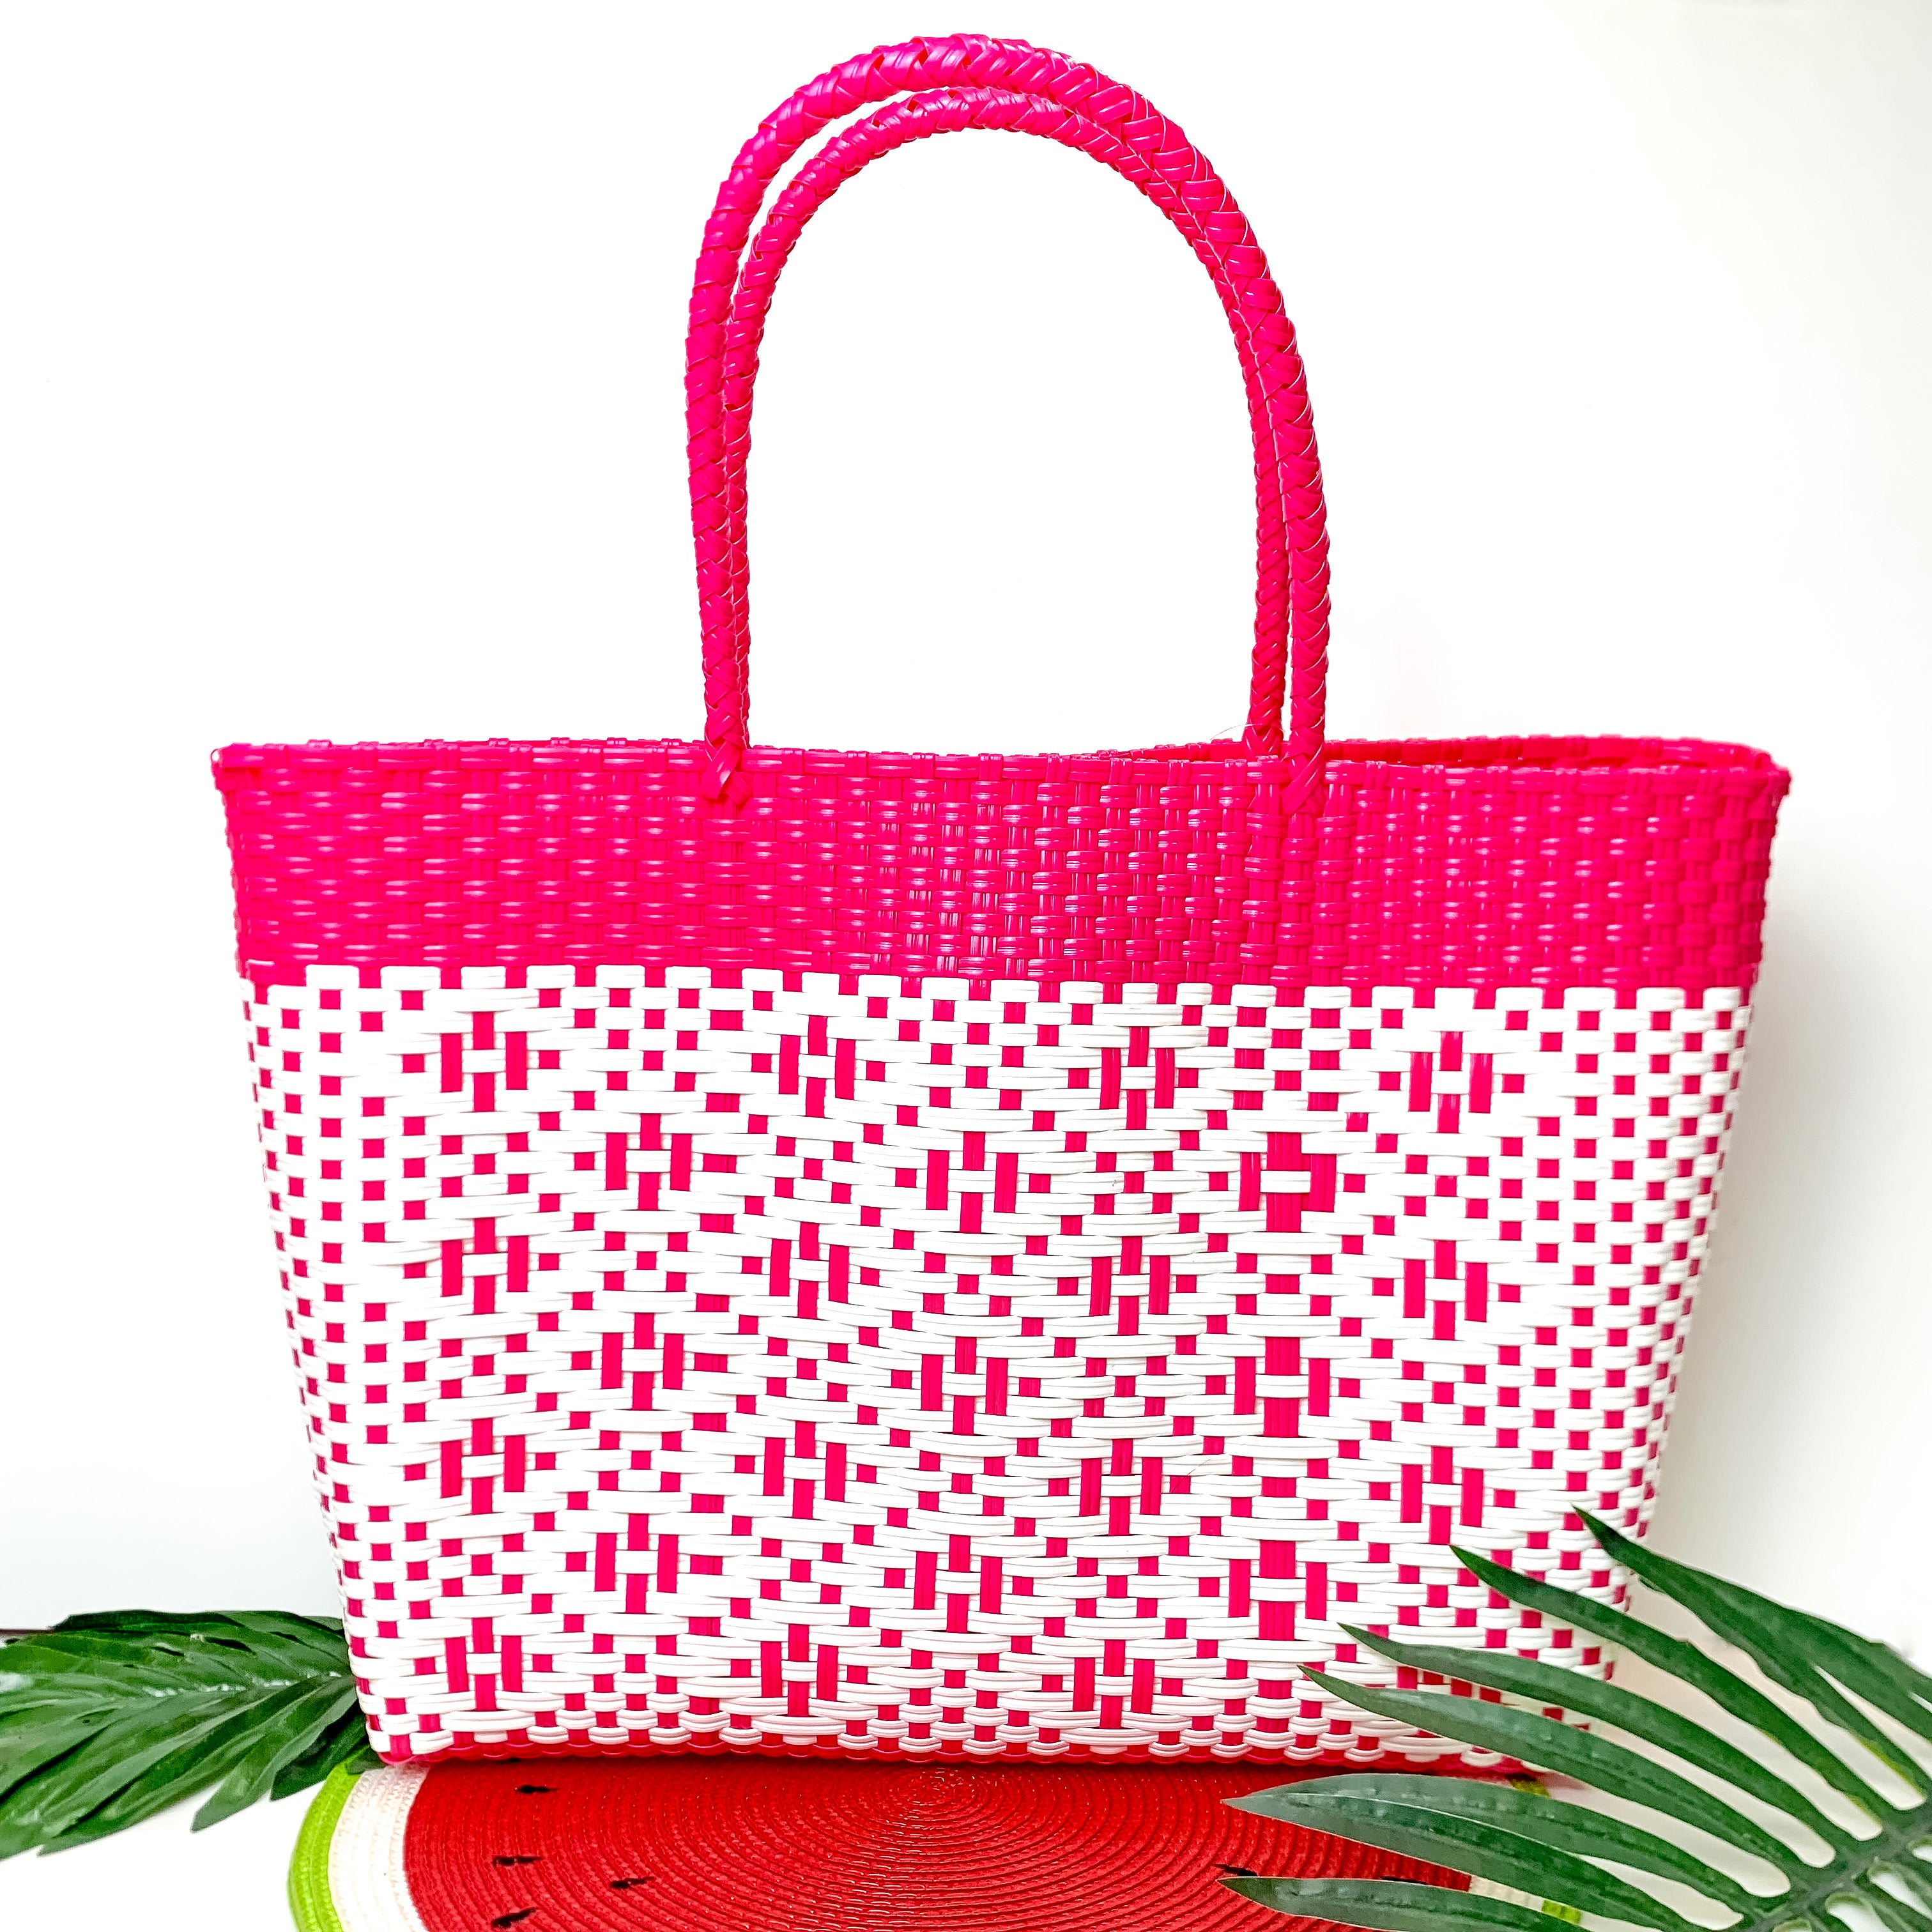 Sonoran Sky Market Tote Bag in Neon Pink and White - Giddy Up Glamour Boutique